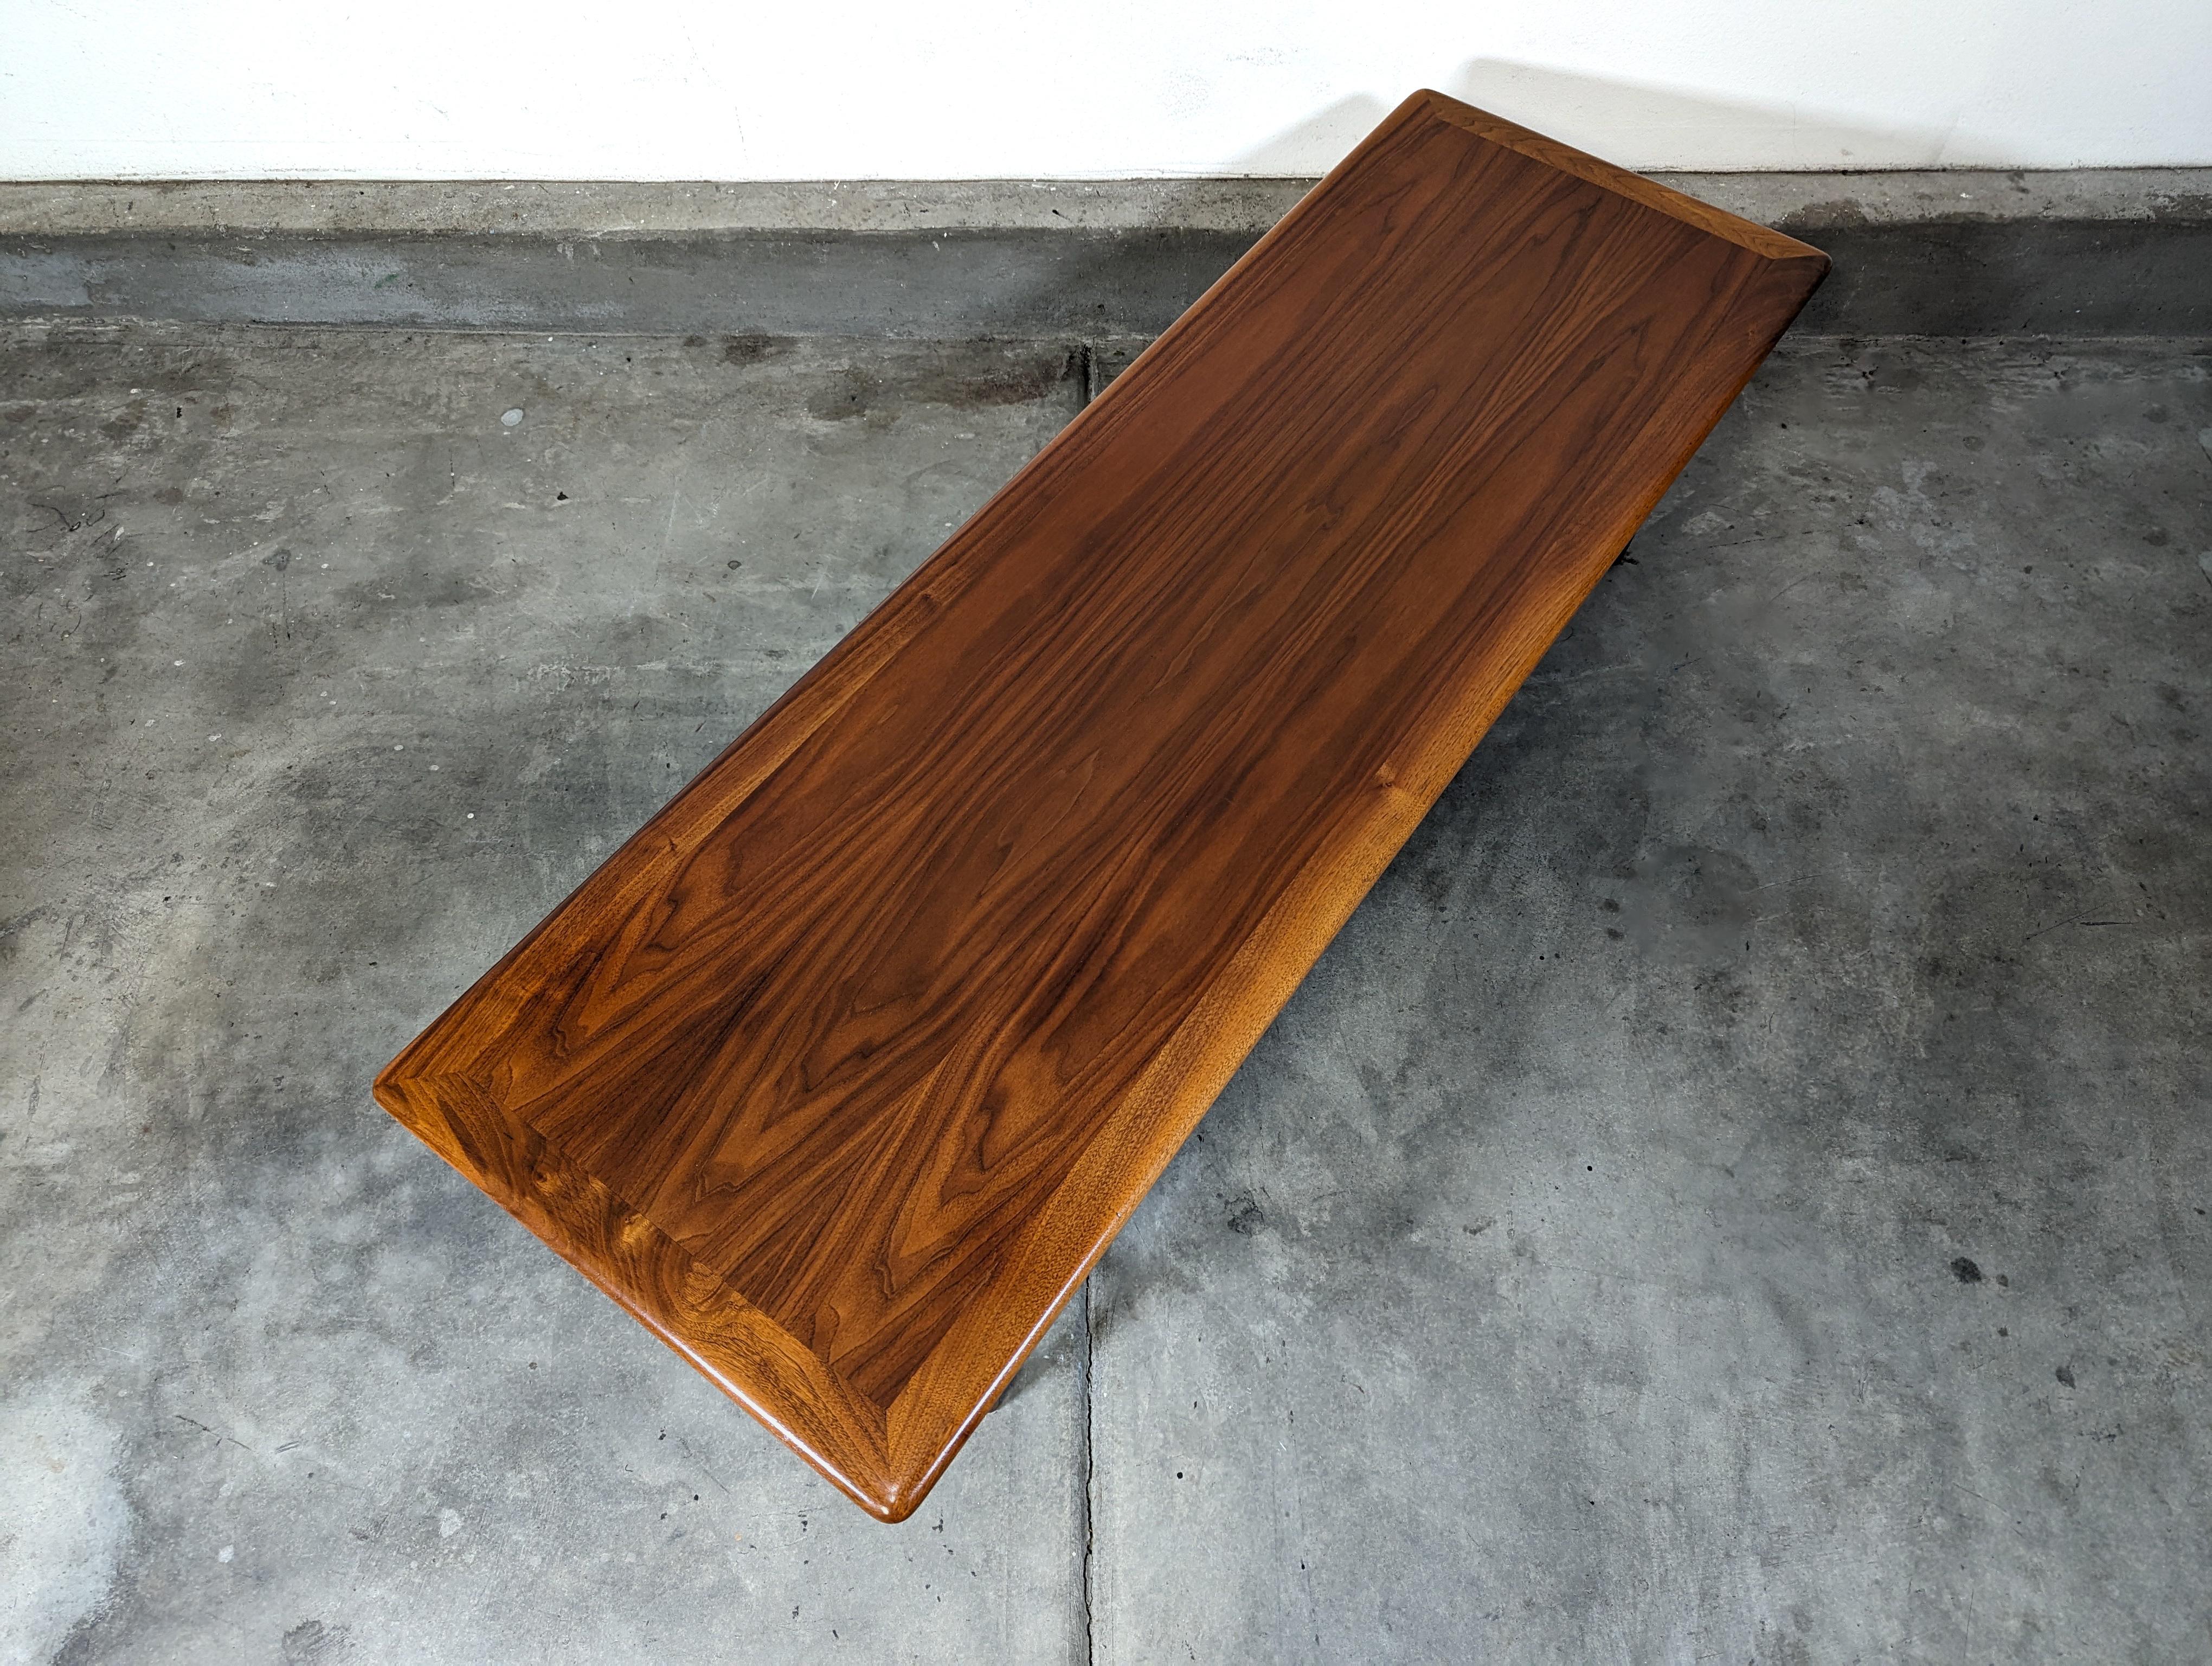 Step back in time with this exquisite vintage mid-century modern coffee table, a true gem from the 1960s crafted by Lane Furniture, a company renowned for its lasting quality and pioneering American designs. This gorgeous walnut piece has been